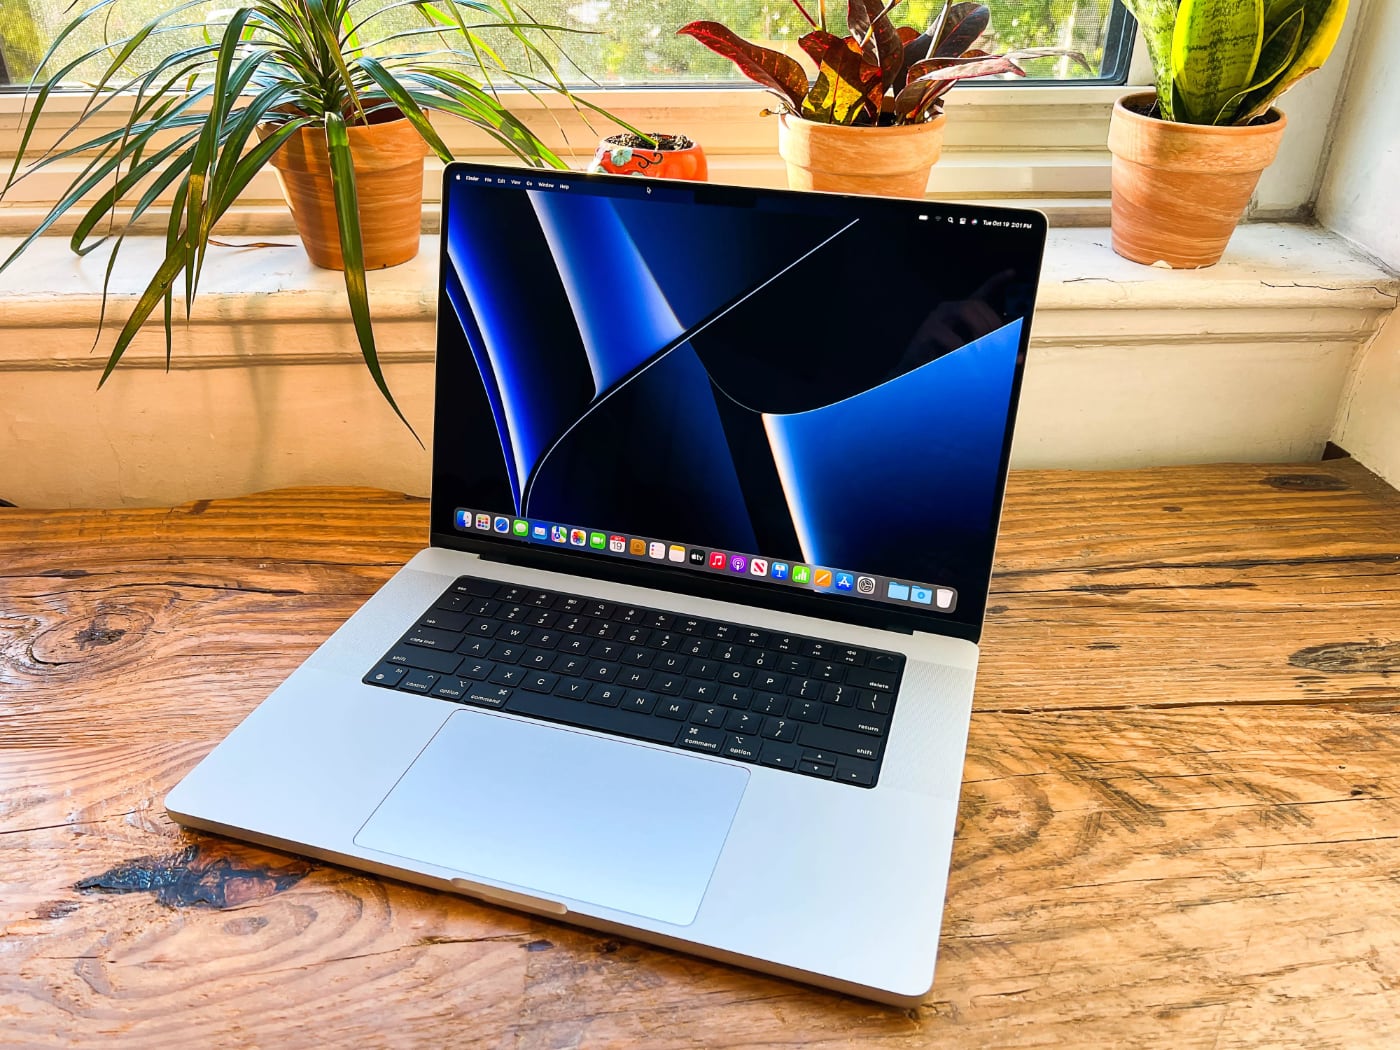 Apple macbook pro 15 inch review cnet best buy mobile alabama